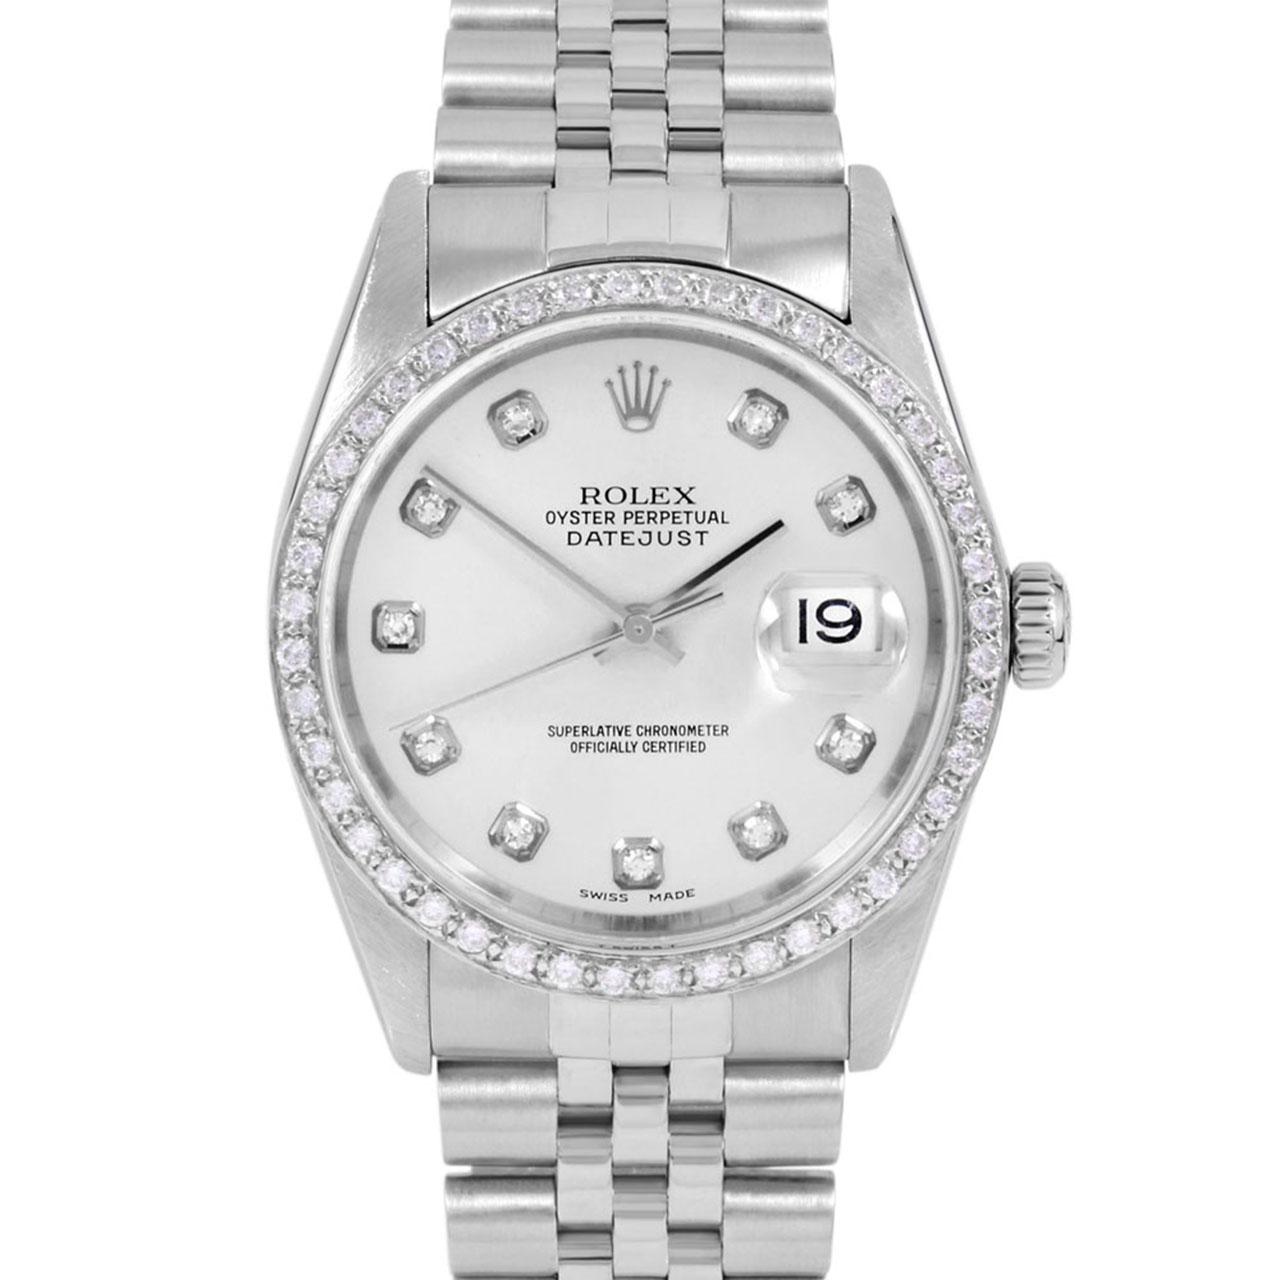 Swiss Wrist - SKU 16014-SLV-DIA-AM-BDS-JBL

Brand : Rolex
Model : Datejust Ref# 16014 - Plastic Quickset Model 
Gender : Mens
Metals :  Stainless Steel
Case Size : 36 mm
Dial : Custom Silver Diamond Dial (This dial is not original Rolex And has been